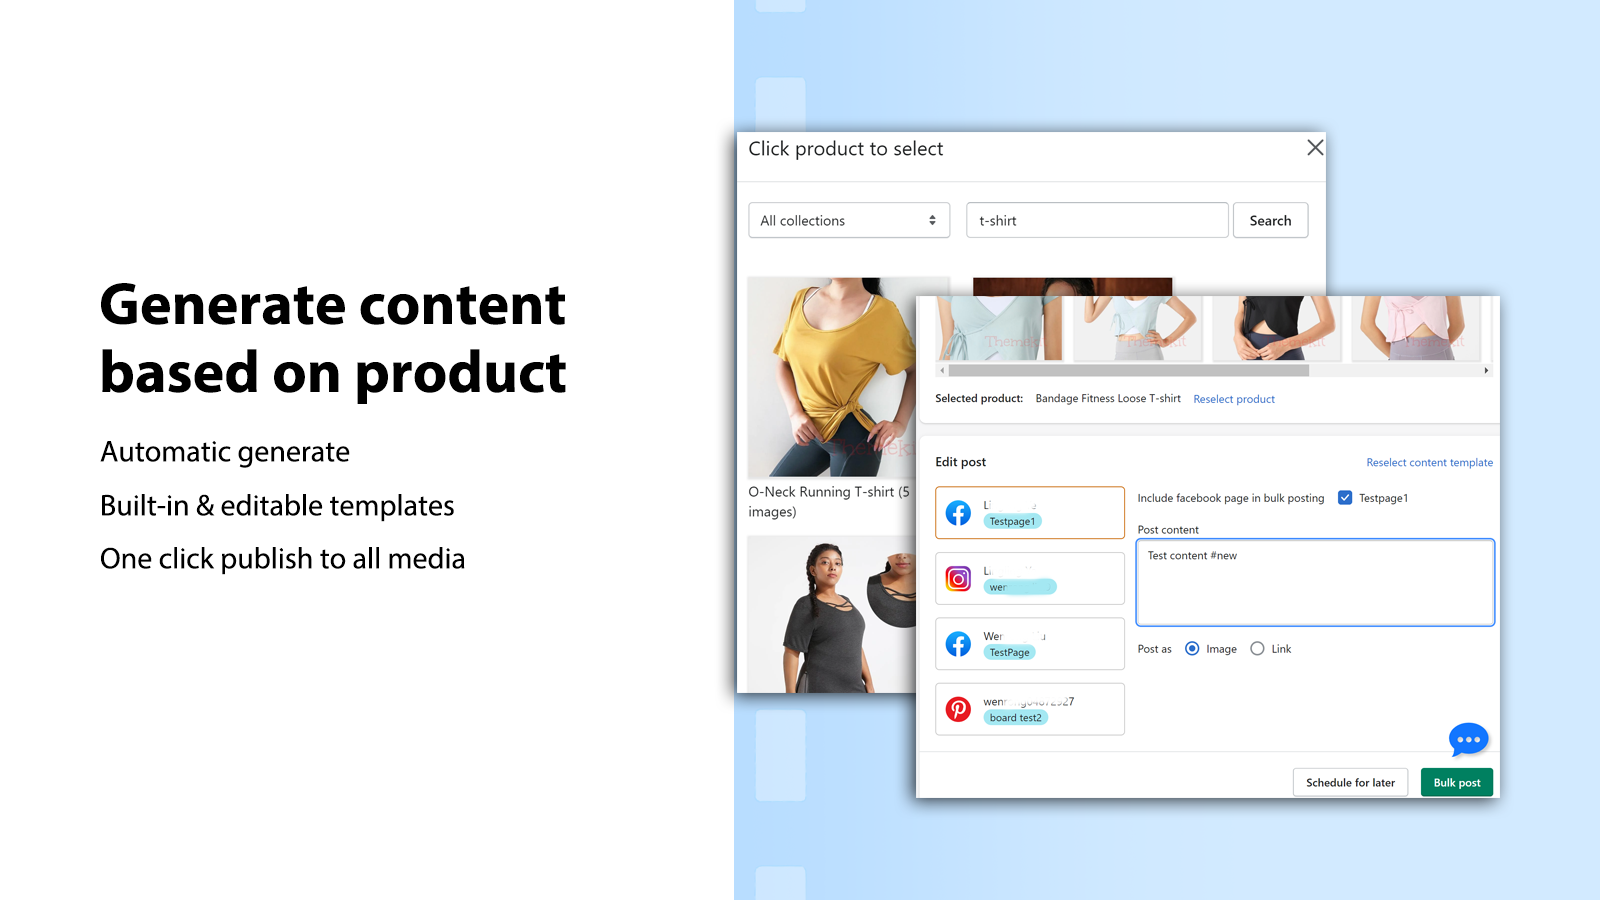 Generate content based on product